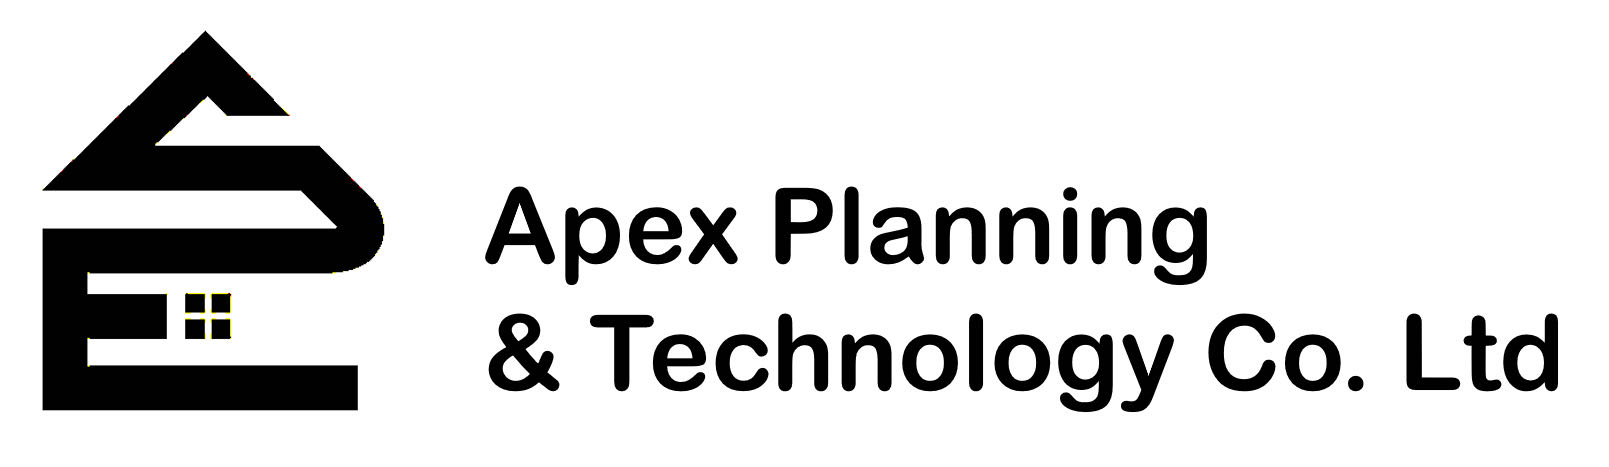 Apex Planning and Technology Co. Ltd